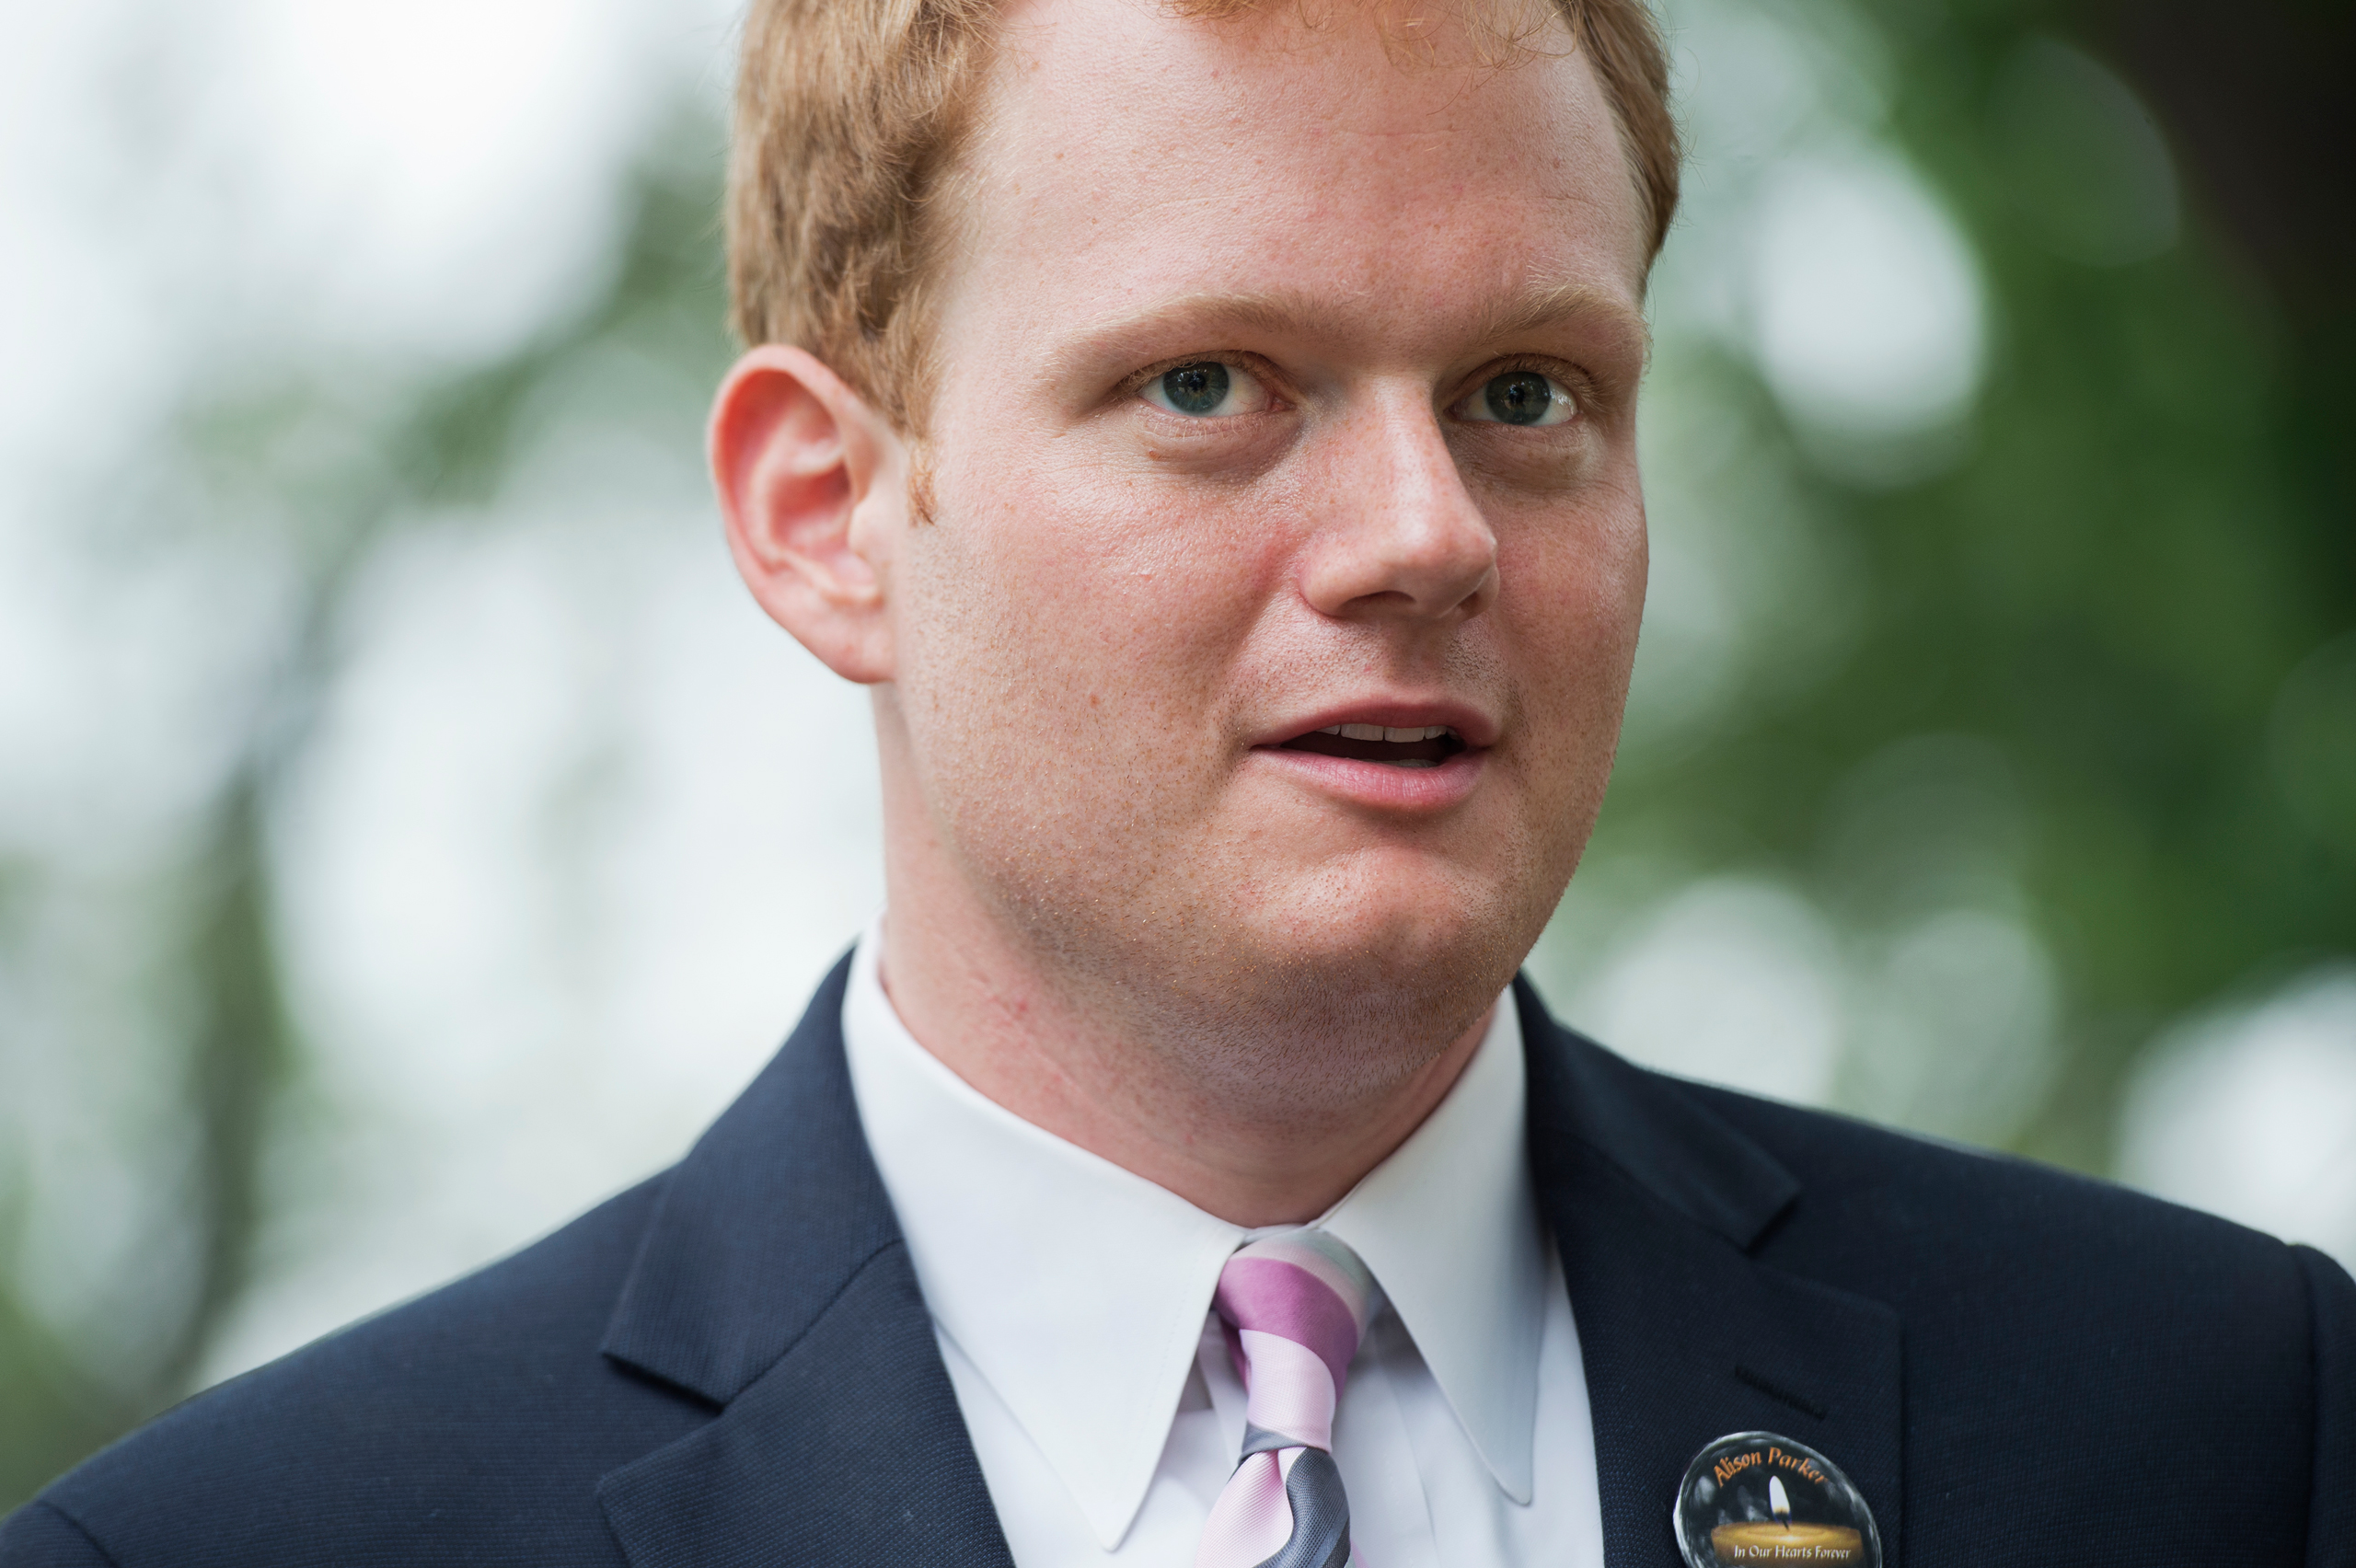 Chris Hurst, whose girlfriend Alison Parker, a reporter for WDBJ-TV, was killed on air in a shooting in Roanoke on Aug. 27, 2015, speaks during a rally at the Capitol in Washington on Sept. 10, 2015. (Tom Williams—CQ-Roll Call,Inc./Getty Images)